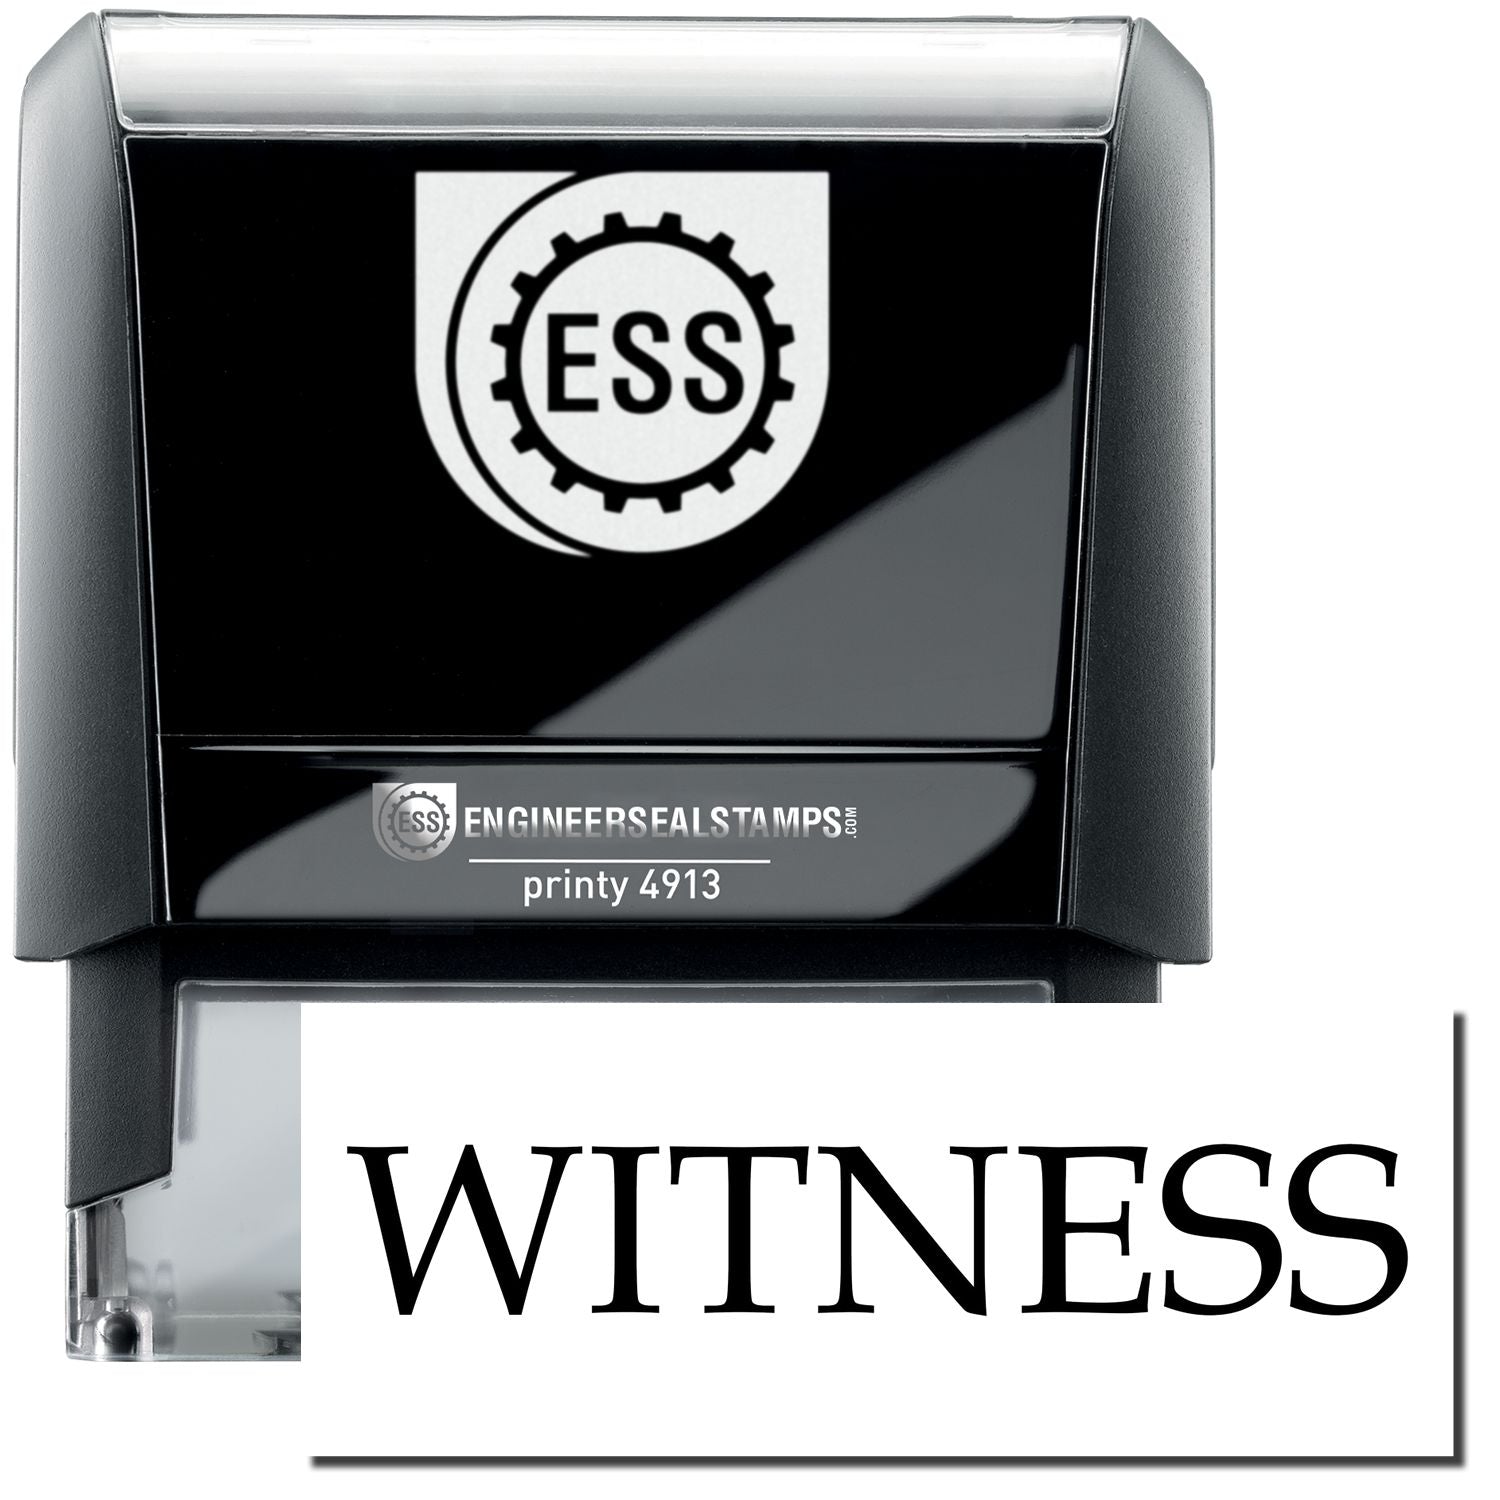 A self-inking stamp with a stamped image showing how the text "WITNESS" in a large bold font is displayed by it.